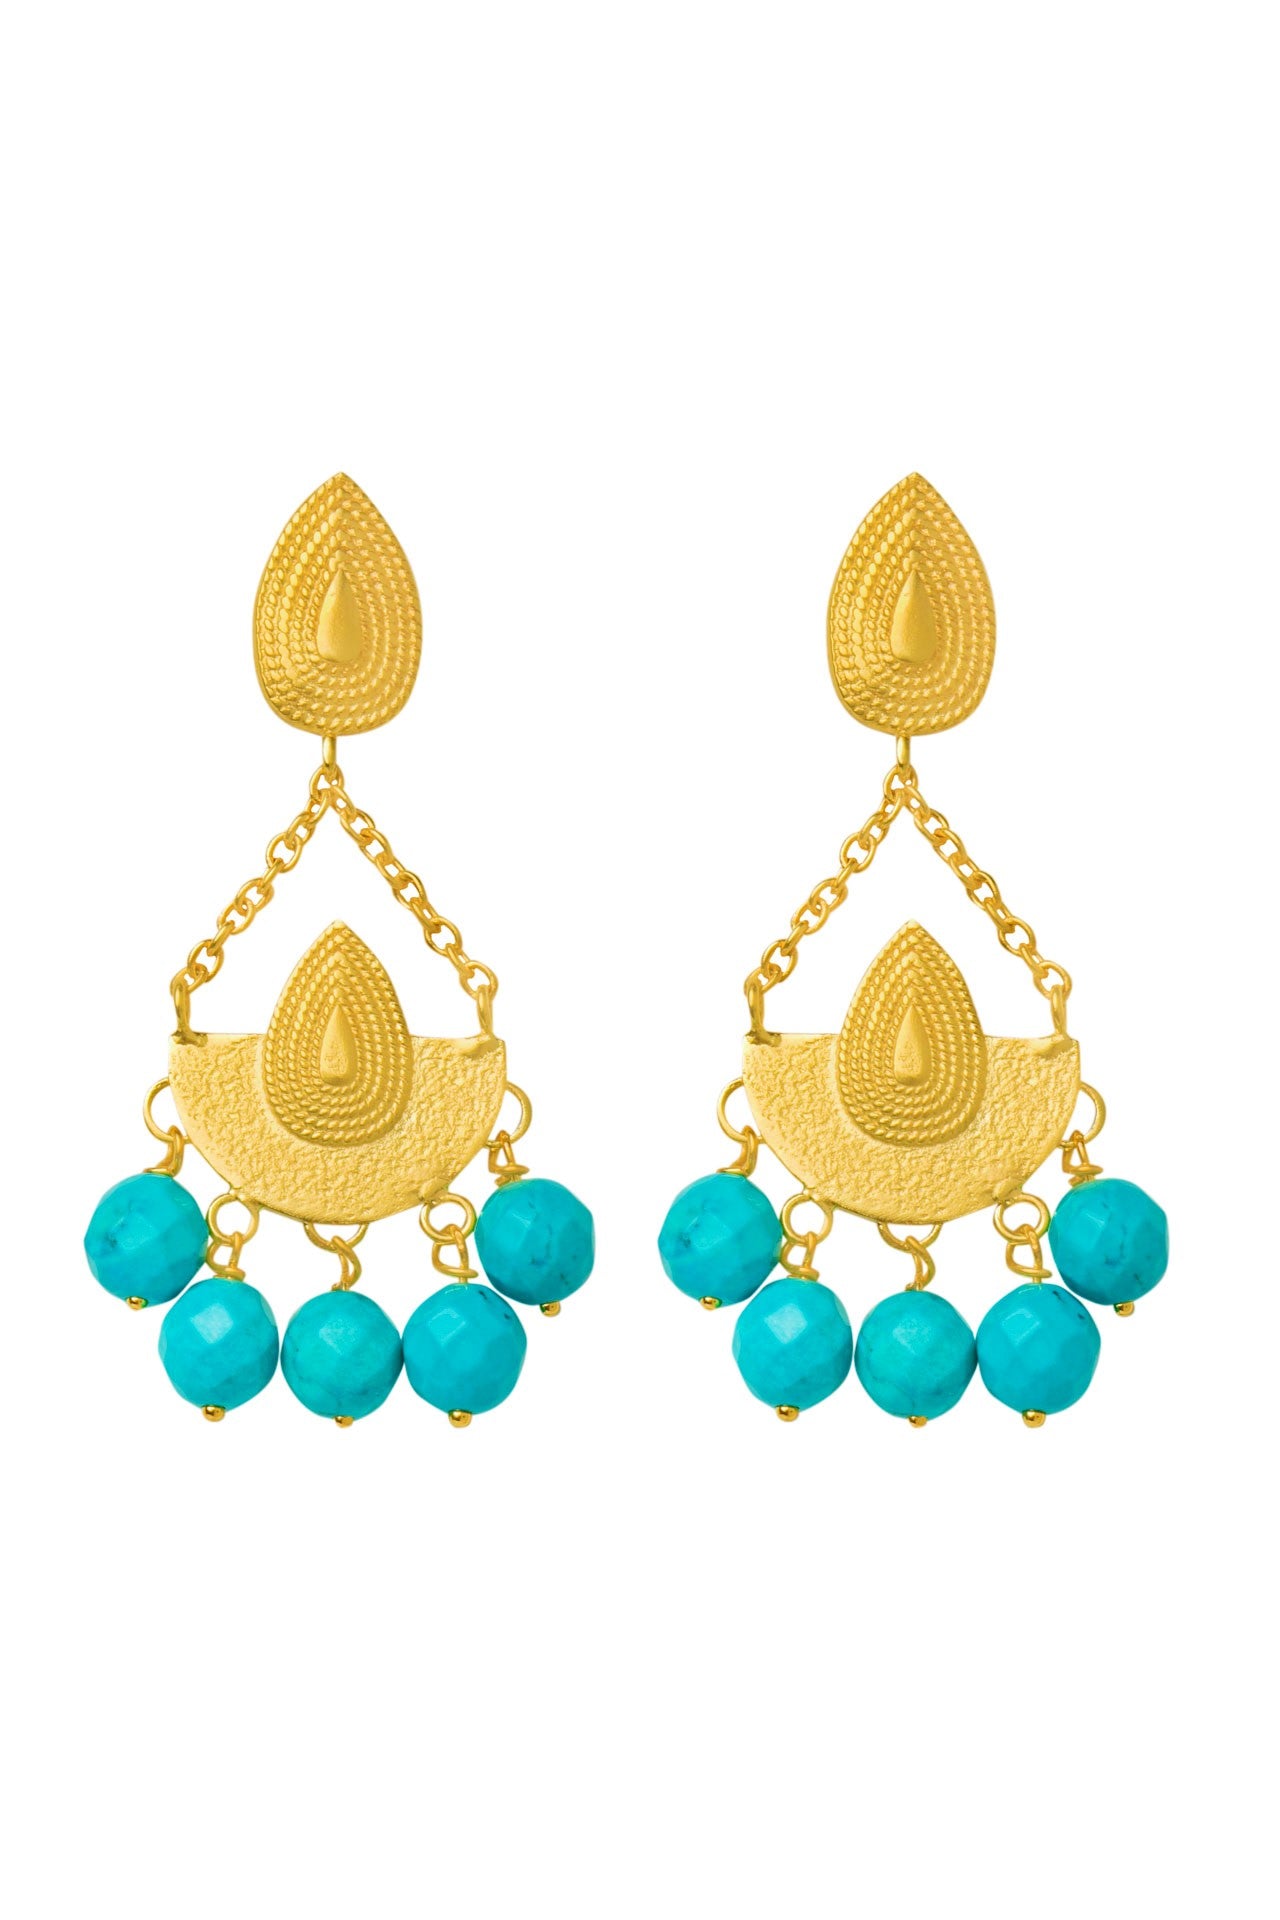 Bianca turquoise earrings by Pearl Martini